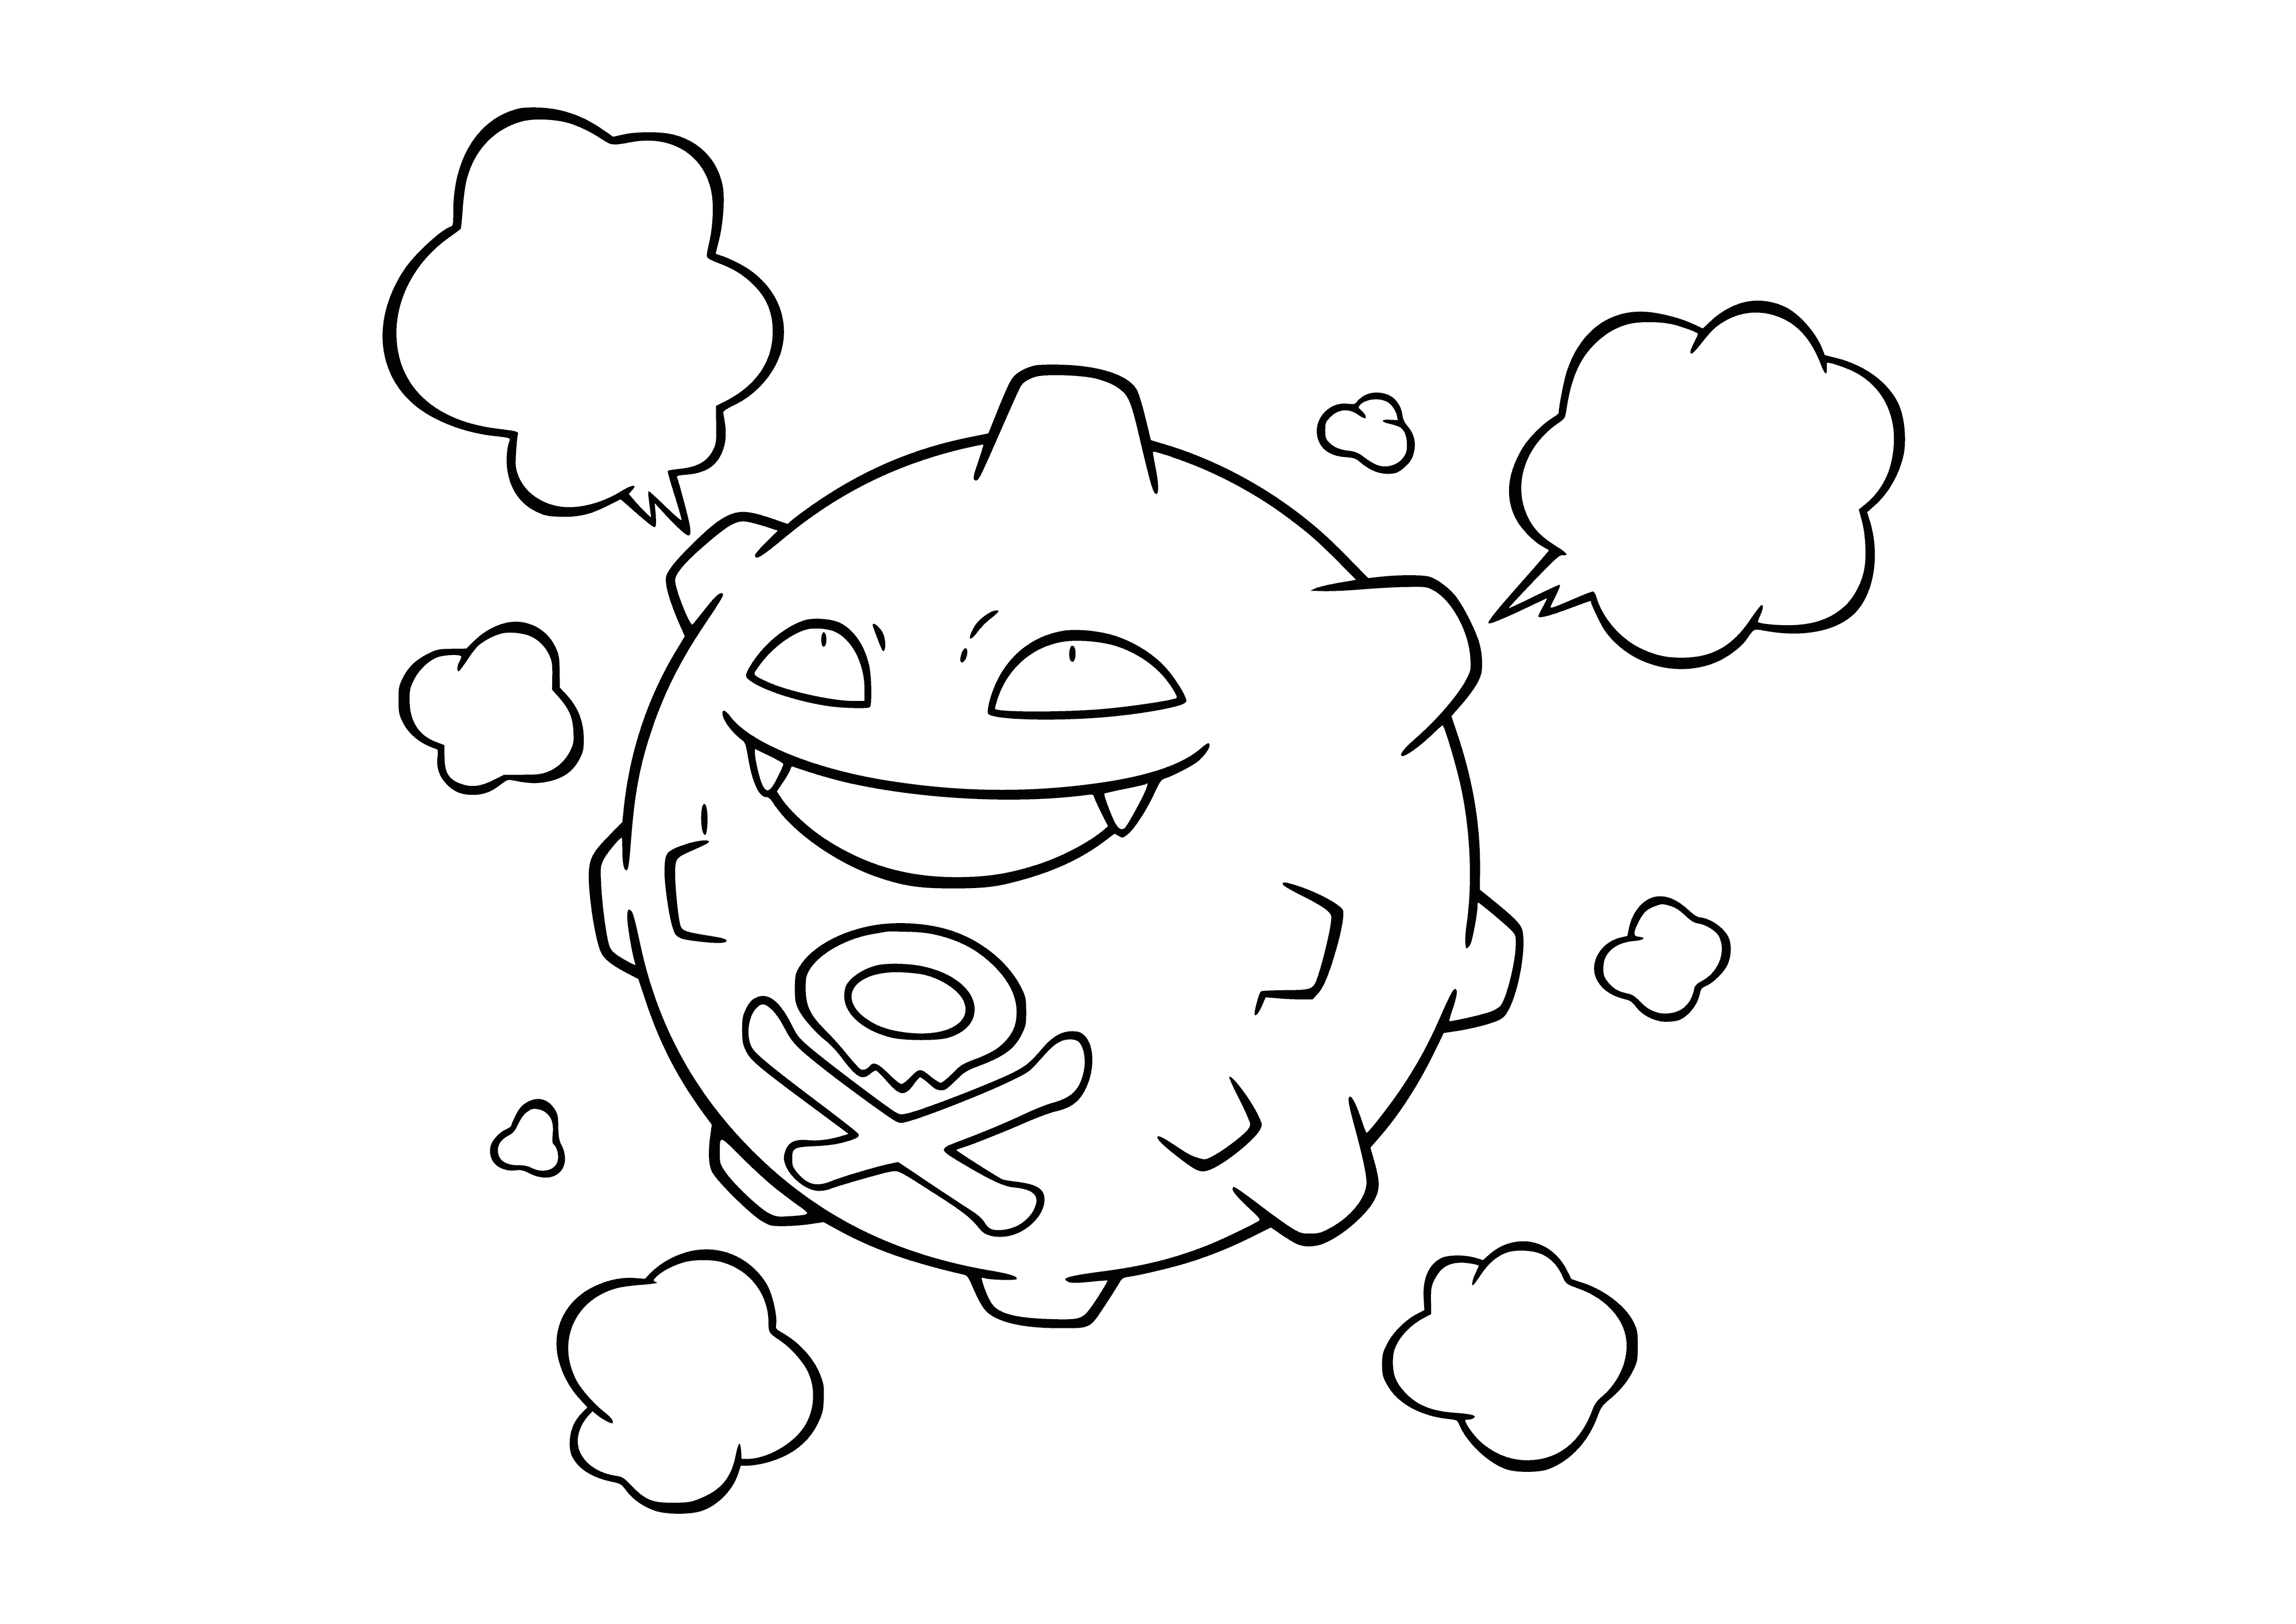 coloring page: Small, black Pokémon w/ orange eyes, mouth, back, legs, & clouds-shaped structures; open mouth reveals teeth.